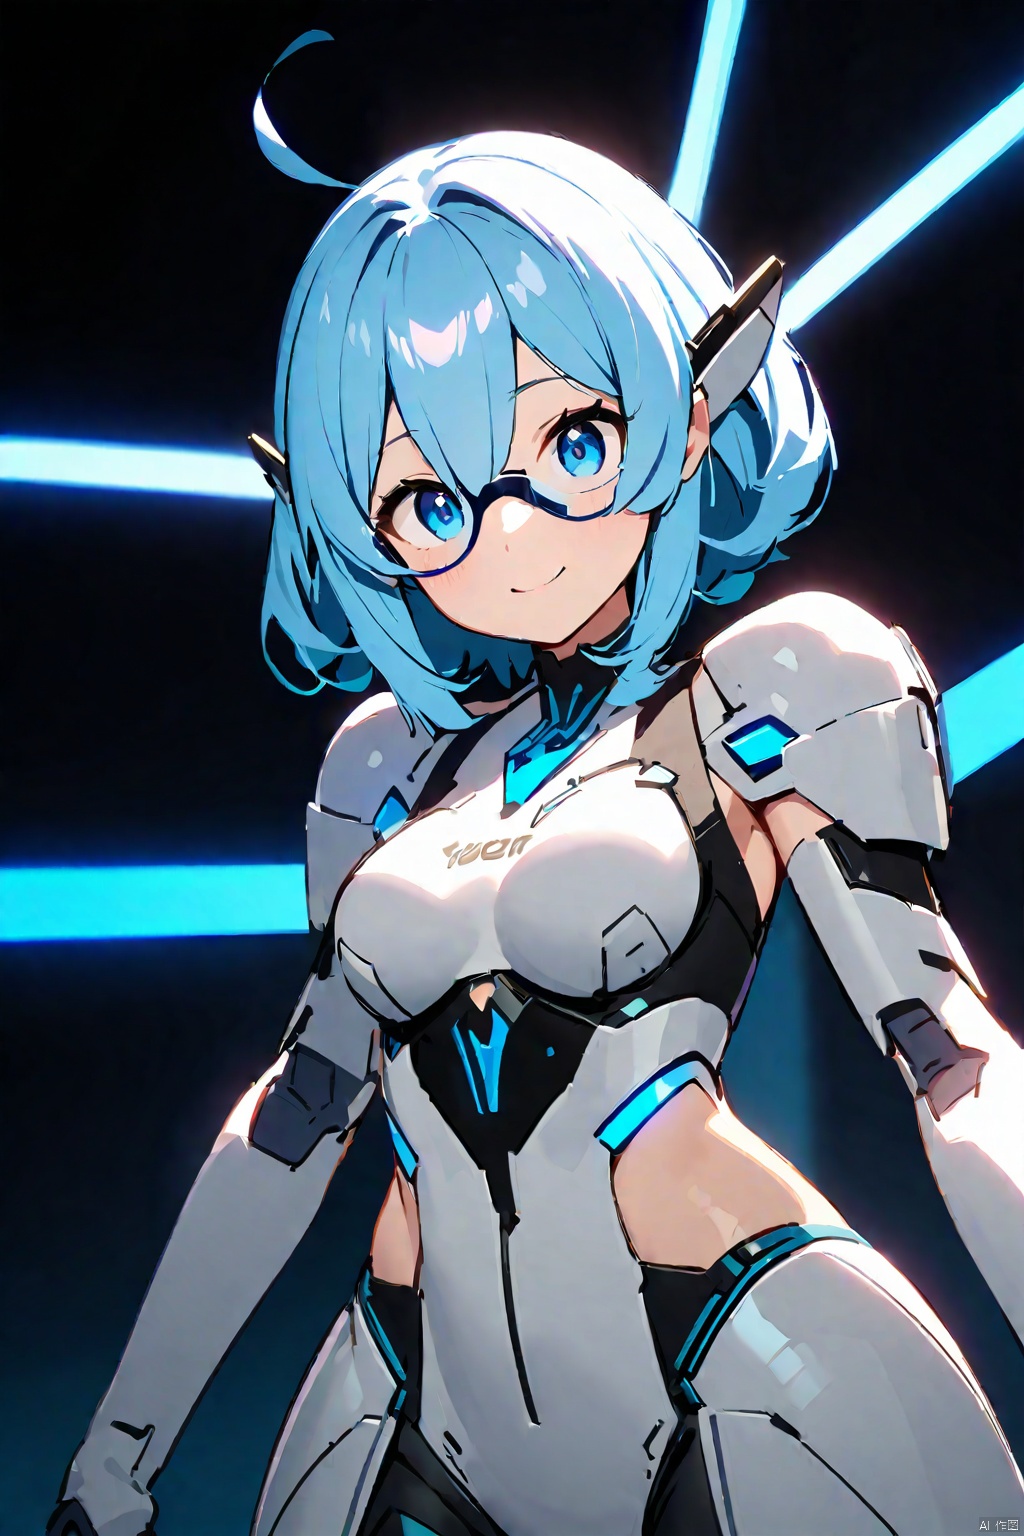 A girl with blue hair, blue glasses, dressed in futuristic technology clothes, with a smile on her face, not wearing glasses. Is she a big sister or a righteous big sister with a strong sense of justice
